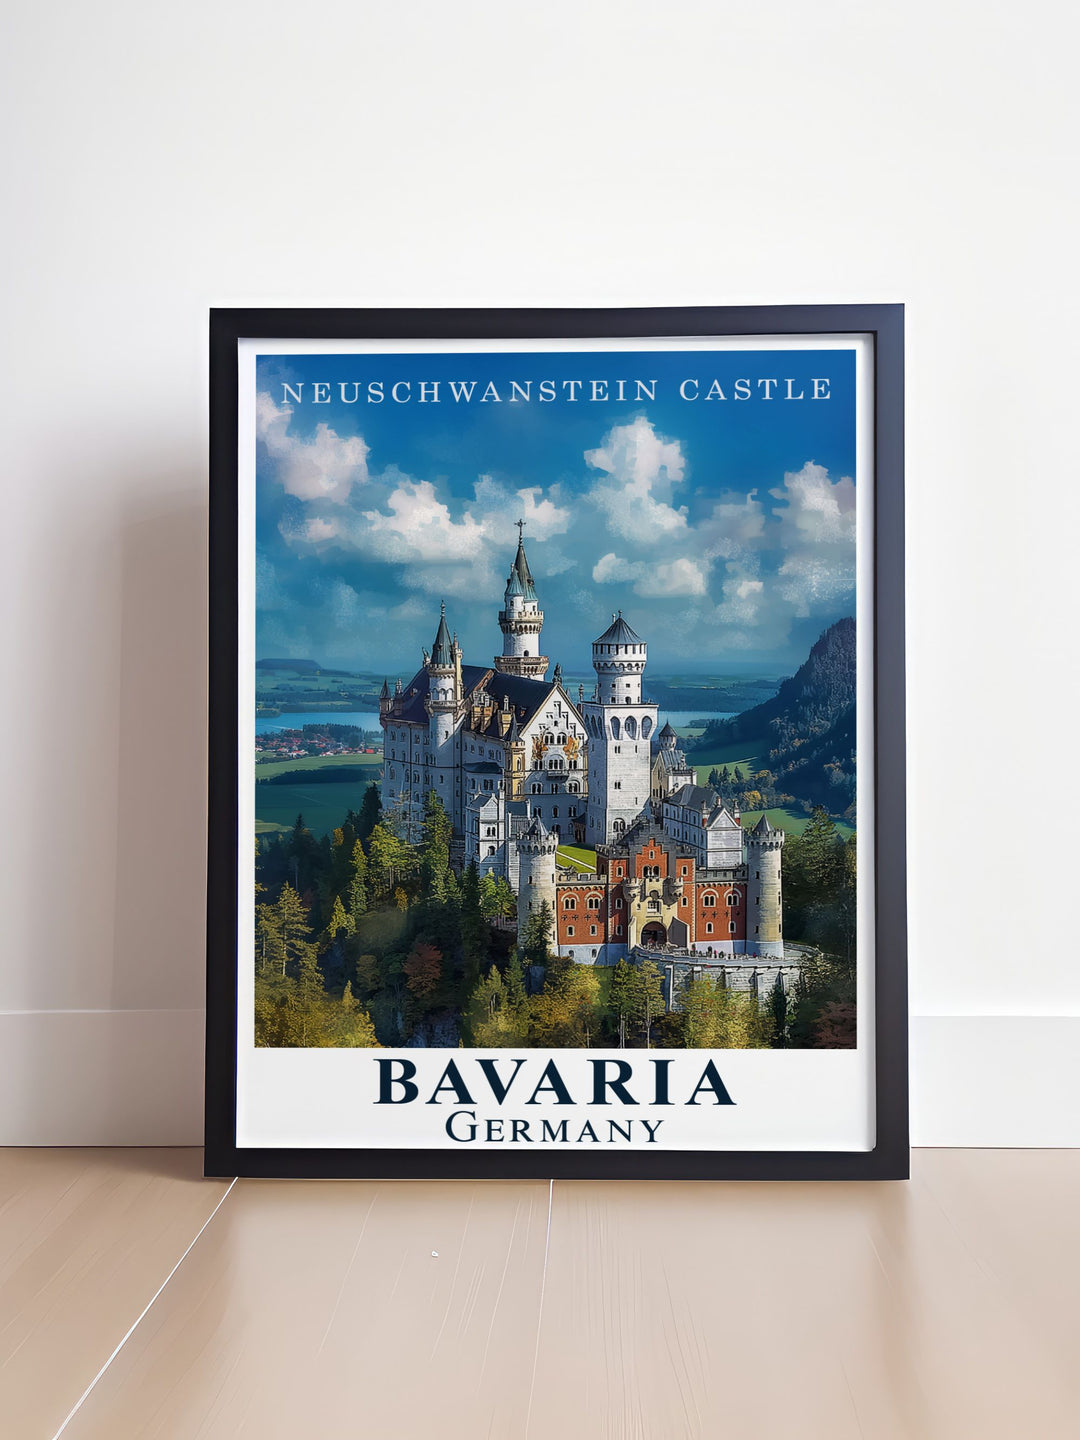 Transform your living space with Neuschwanstein Castle home decor collection. The matted art and street map designs offer sophistication while the botanical garden theme adds a natural touch.